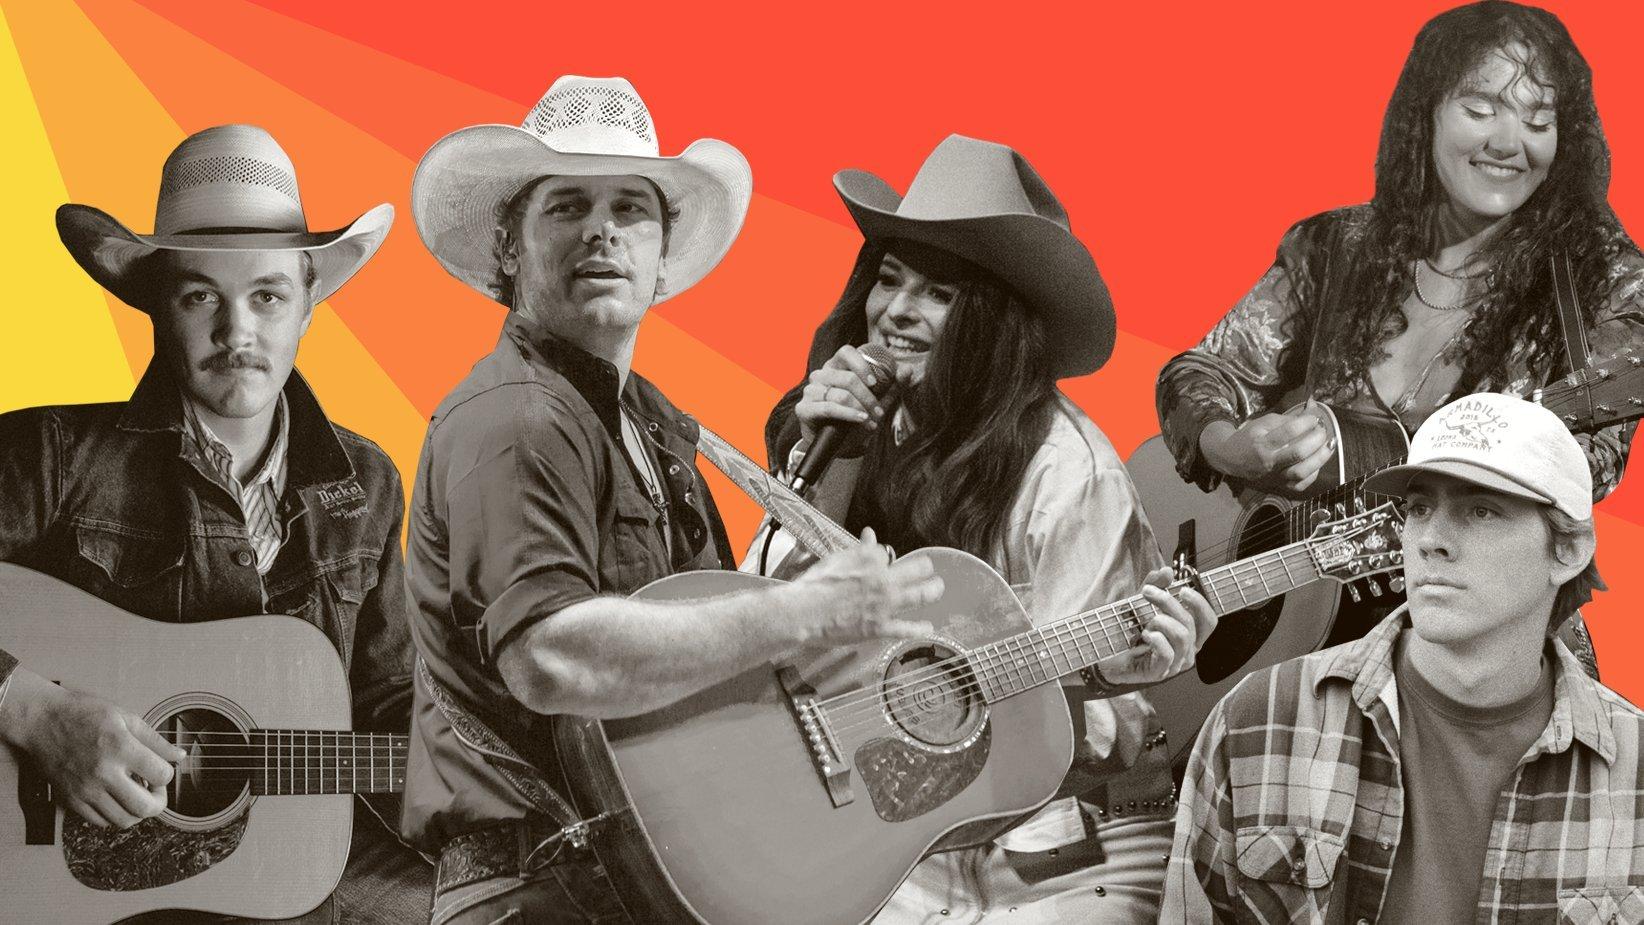 The Cowboy Hat Is Summer 2019's Breakout Star - But It's More Than